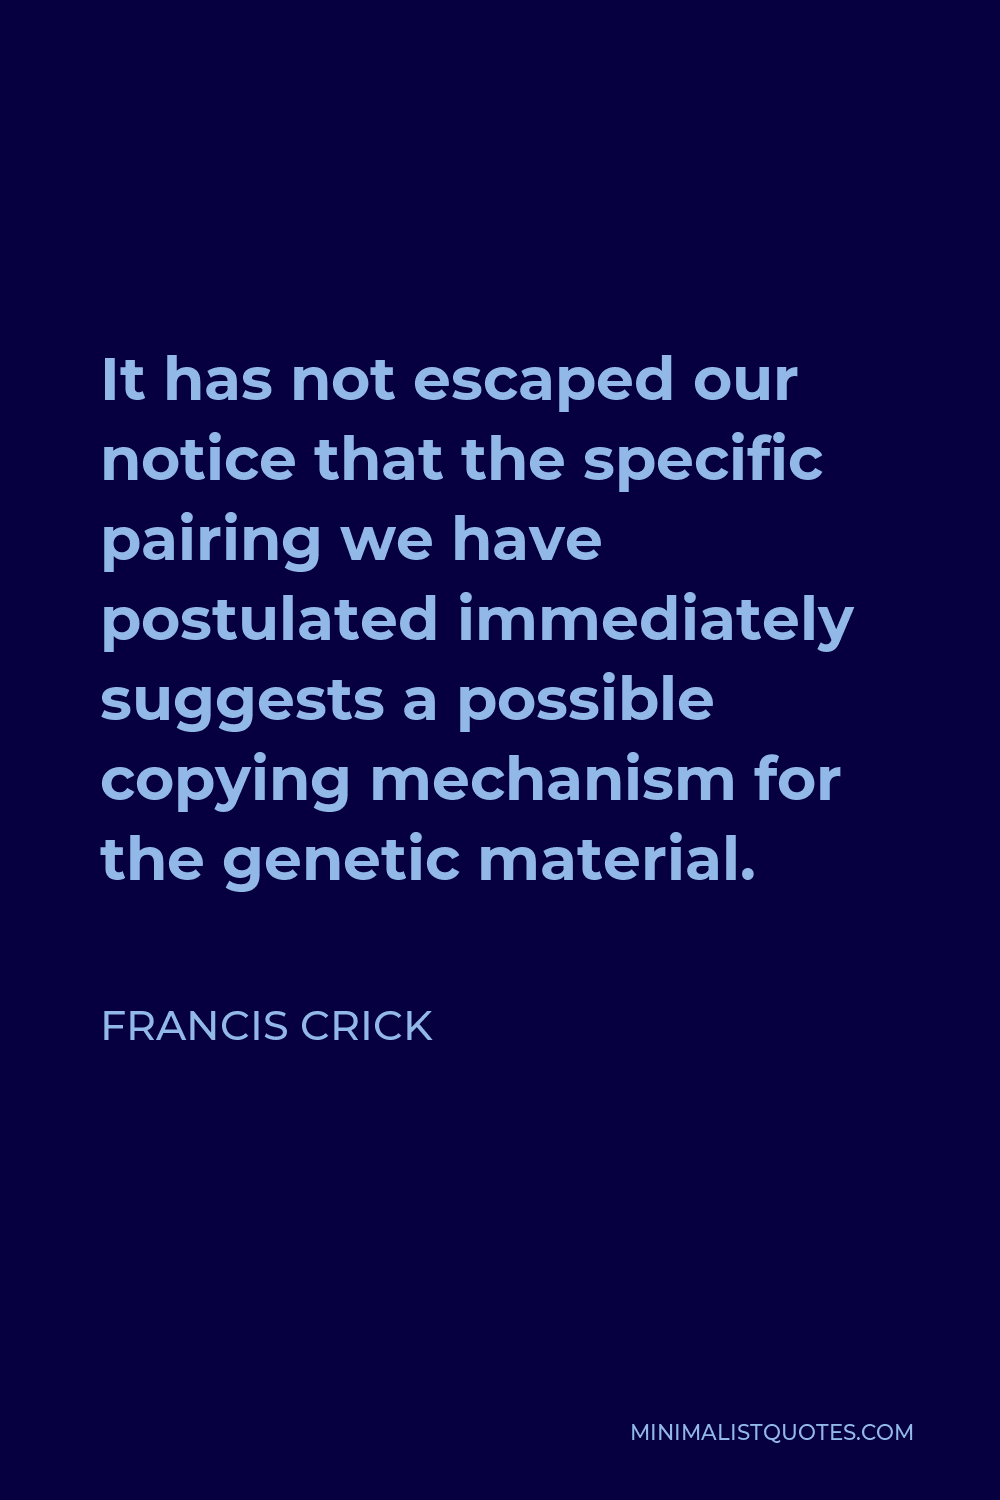 Francis Crick Quote - It has not escaped our notice that the specific pairing we have postulated immediately suggests a possible copying mechanism for the genetic material.